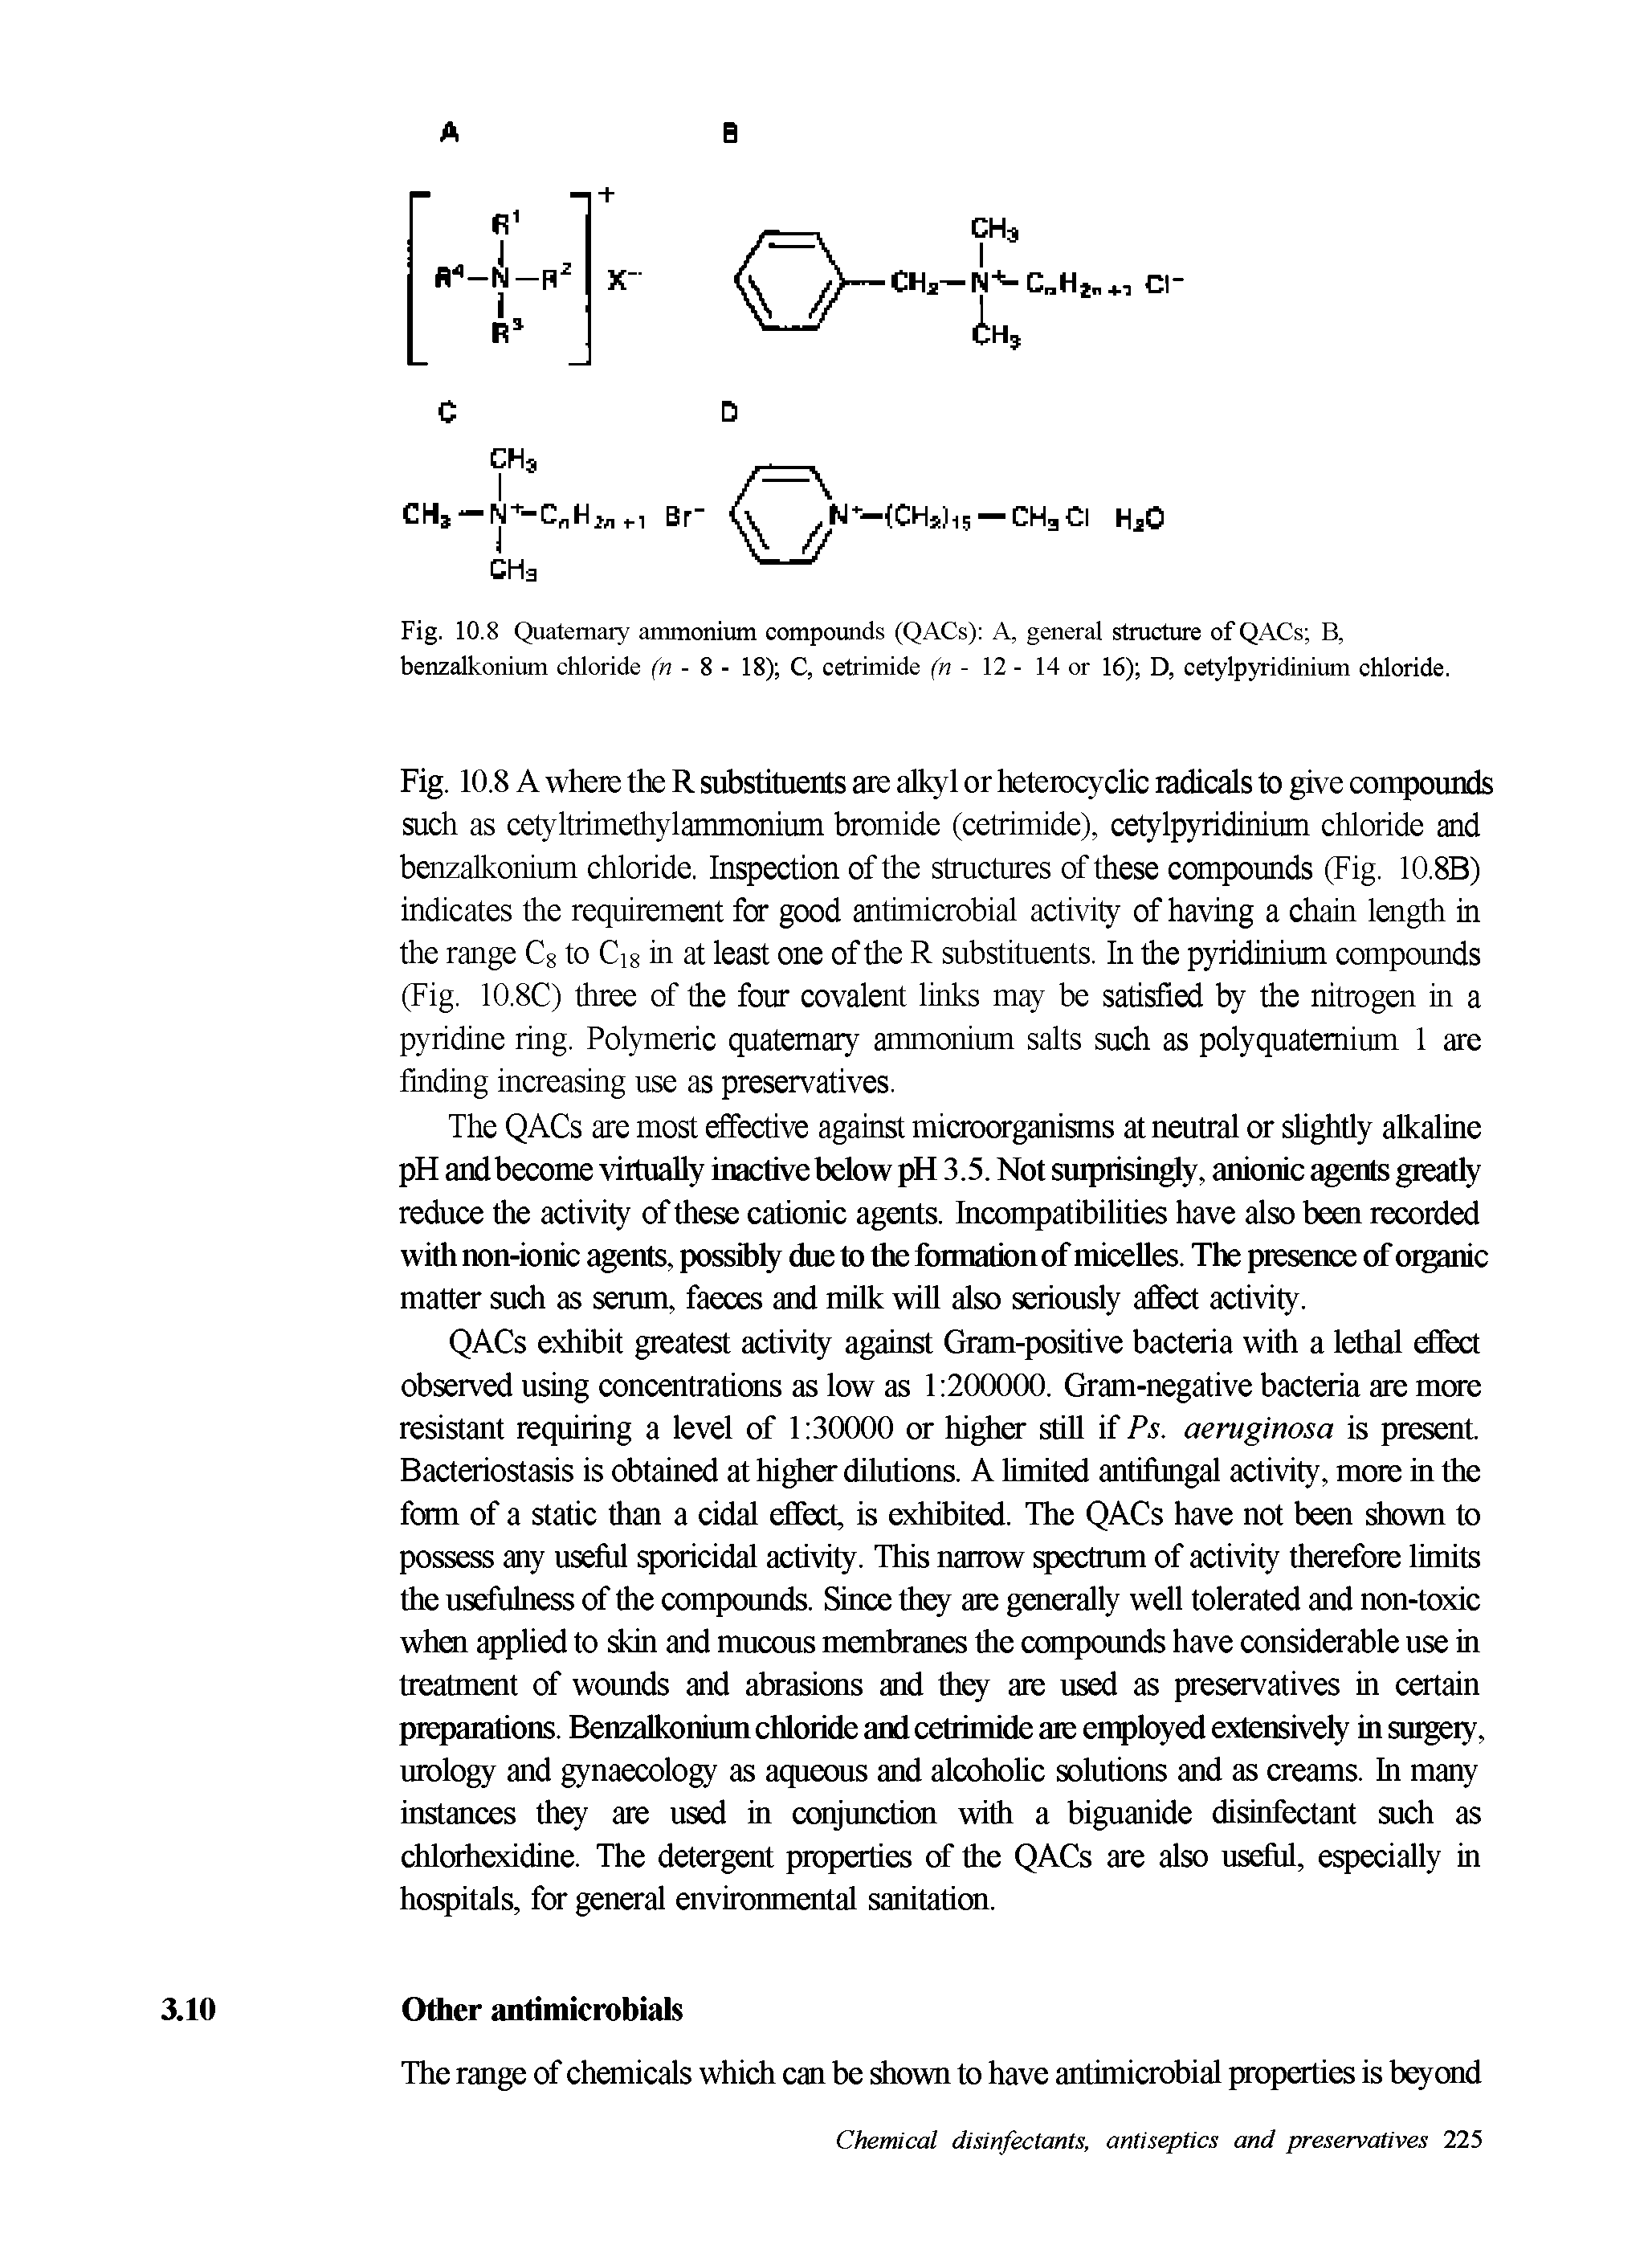 Fig. 10.8 A where the R substituents are alkyl or heterocyclic radicals to give compounds such as cetyltrimethylammonium bromide (cetrimide), cetylpyridinium chloride and benzalkonium chloride. Inspection of the stmctures of these compounds (Fig. 10.8B) indicates the requirement for good antimicrobial activily of having a chain length in the range Cg to Cig in at least one of the R substituents. In the pyridinium compounds (Fig. 10.8C) three of the four covalent links may be satisfied by the nitrogen in a pyridine ring. Polymeric quaternary ammonium salts such as polyquatemium 1 are finding increasing use as preservatives.